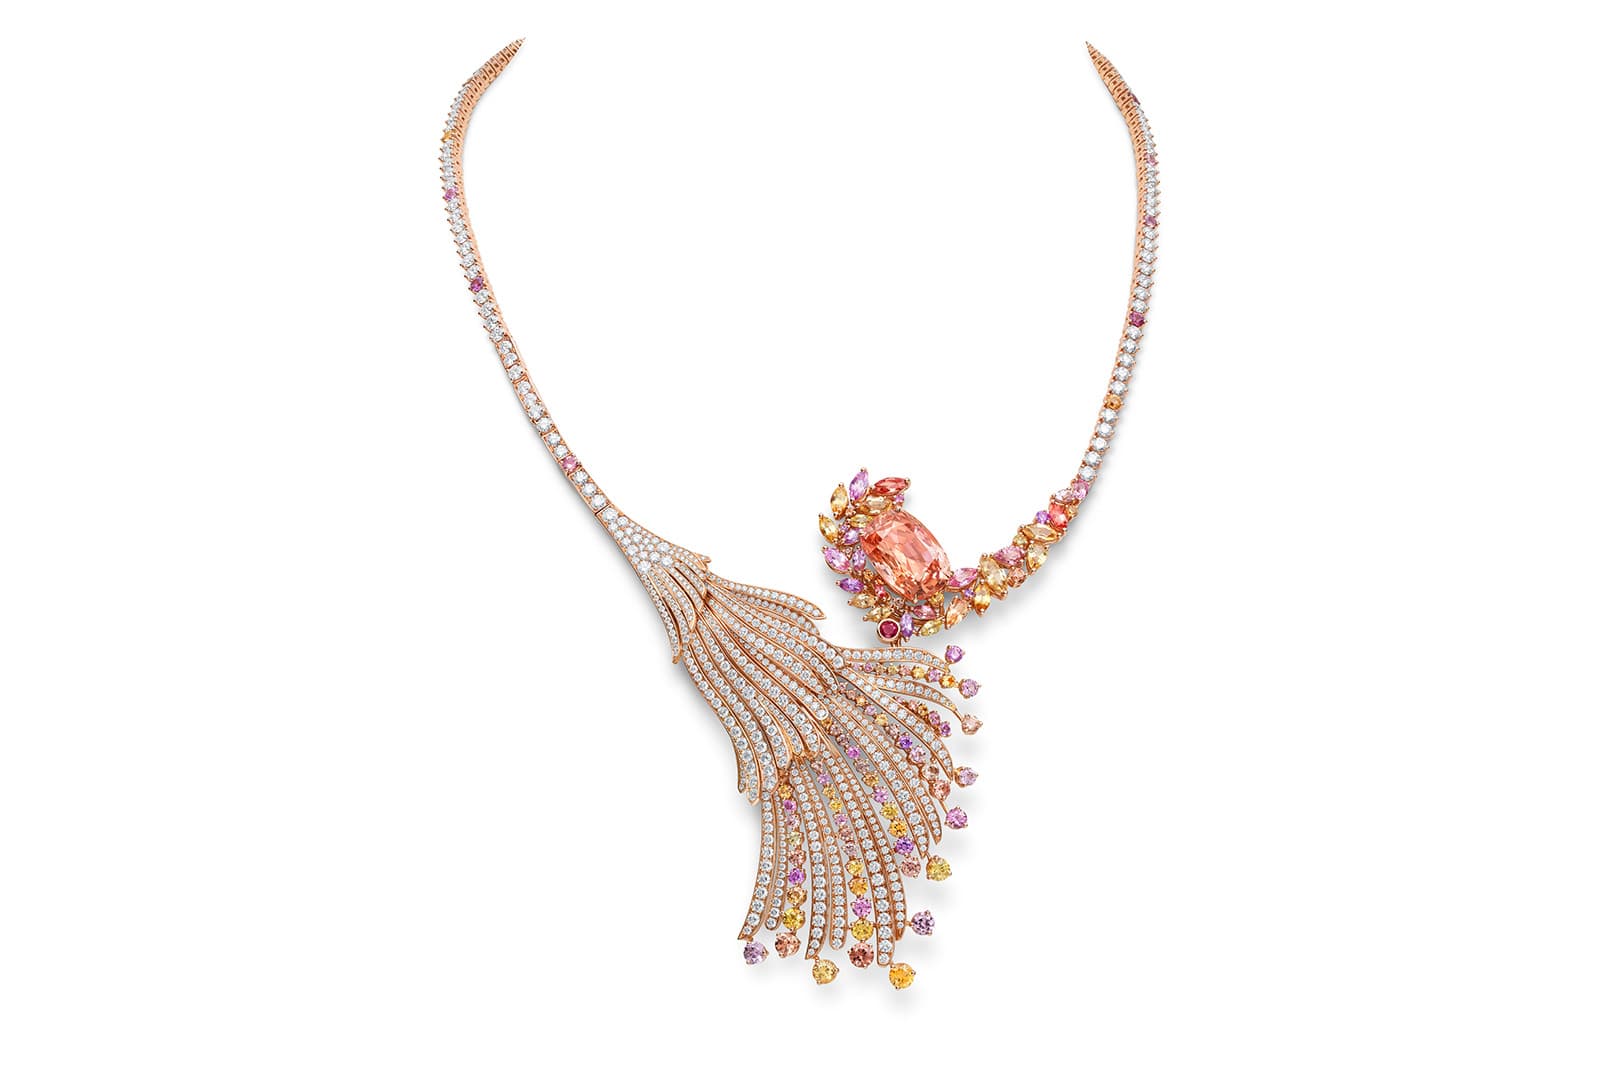 Gübelin Jewellery Blushing Wing necklace with 12.10ct Sri Lankan Padparadscha sapphire, yellow and purple sapphires, diamonds and ruby in red gold 